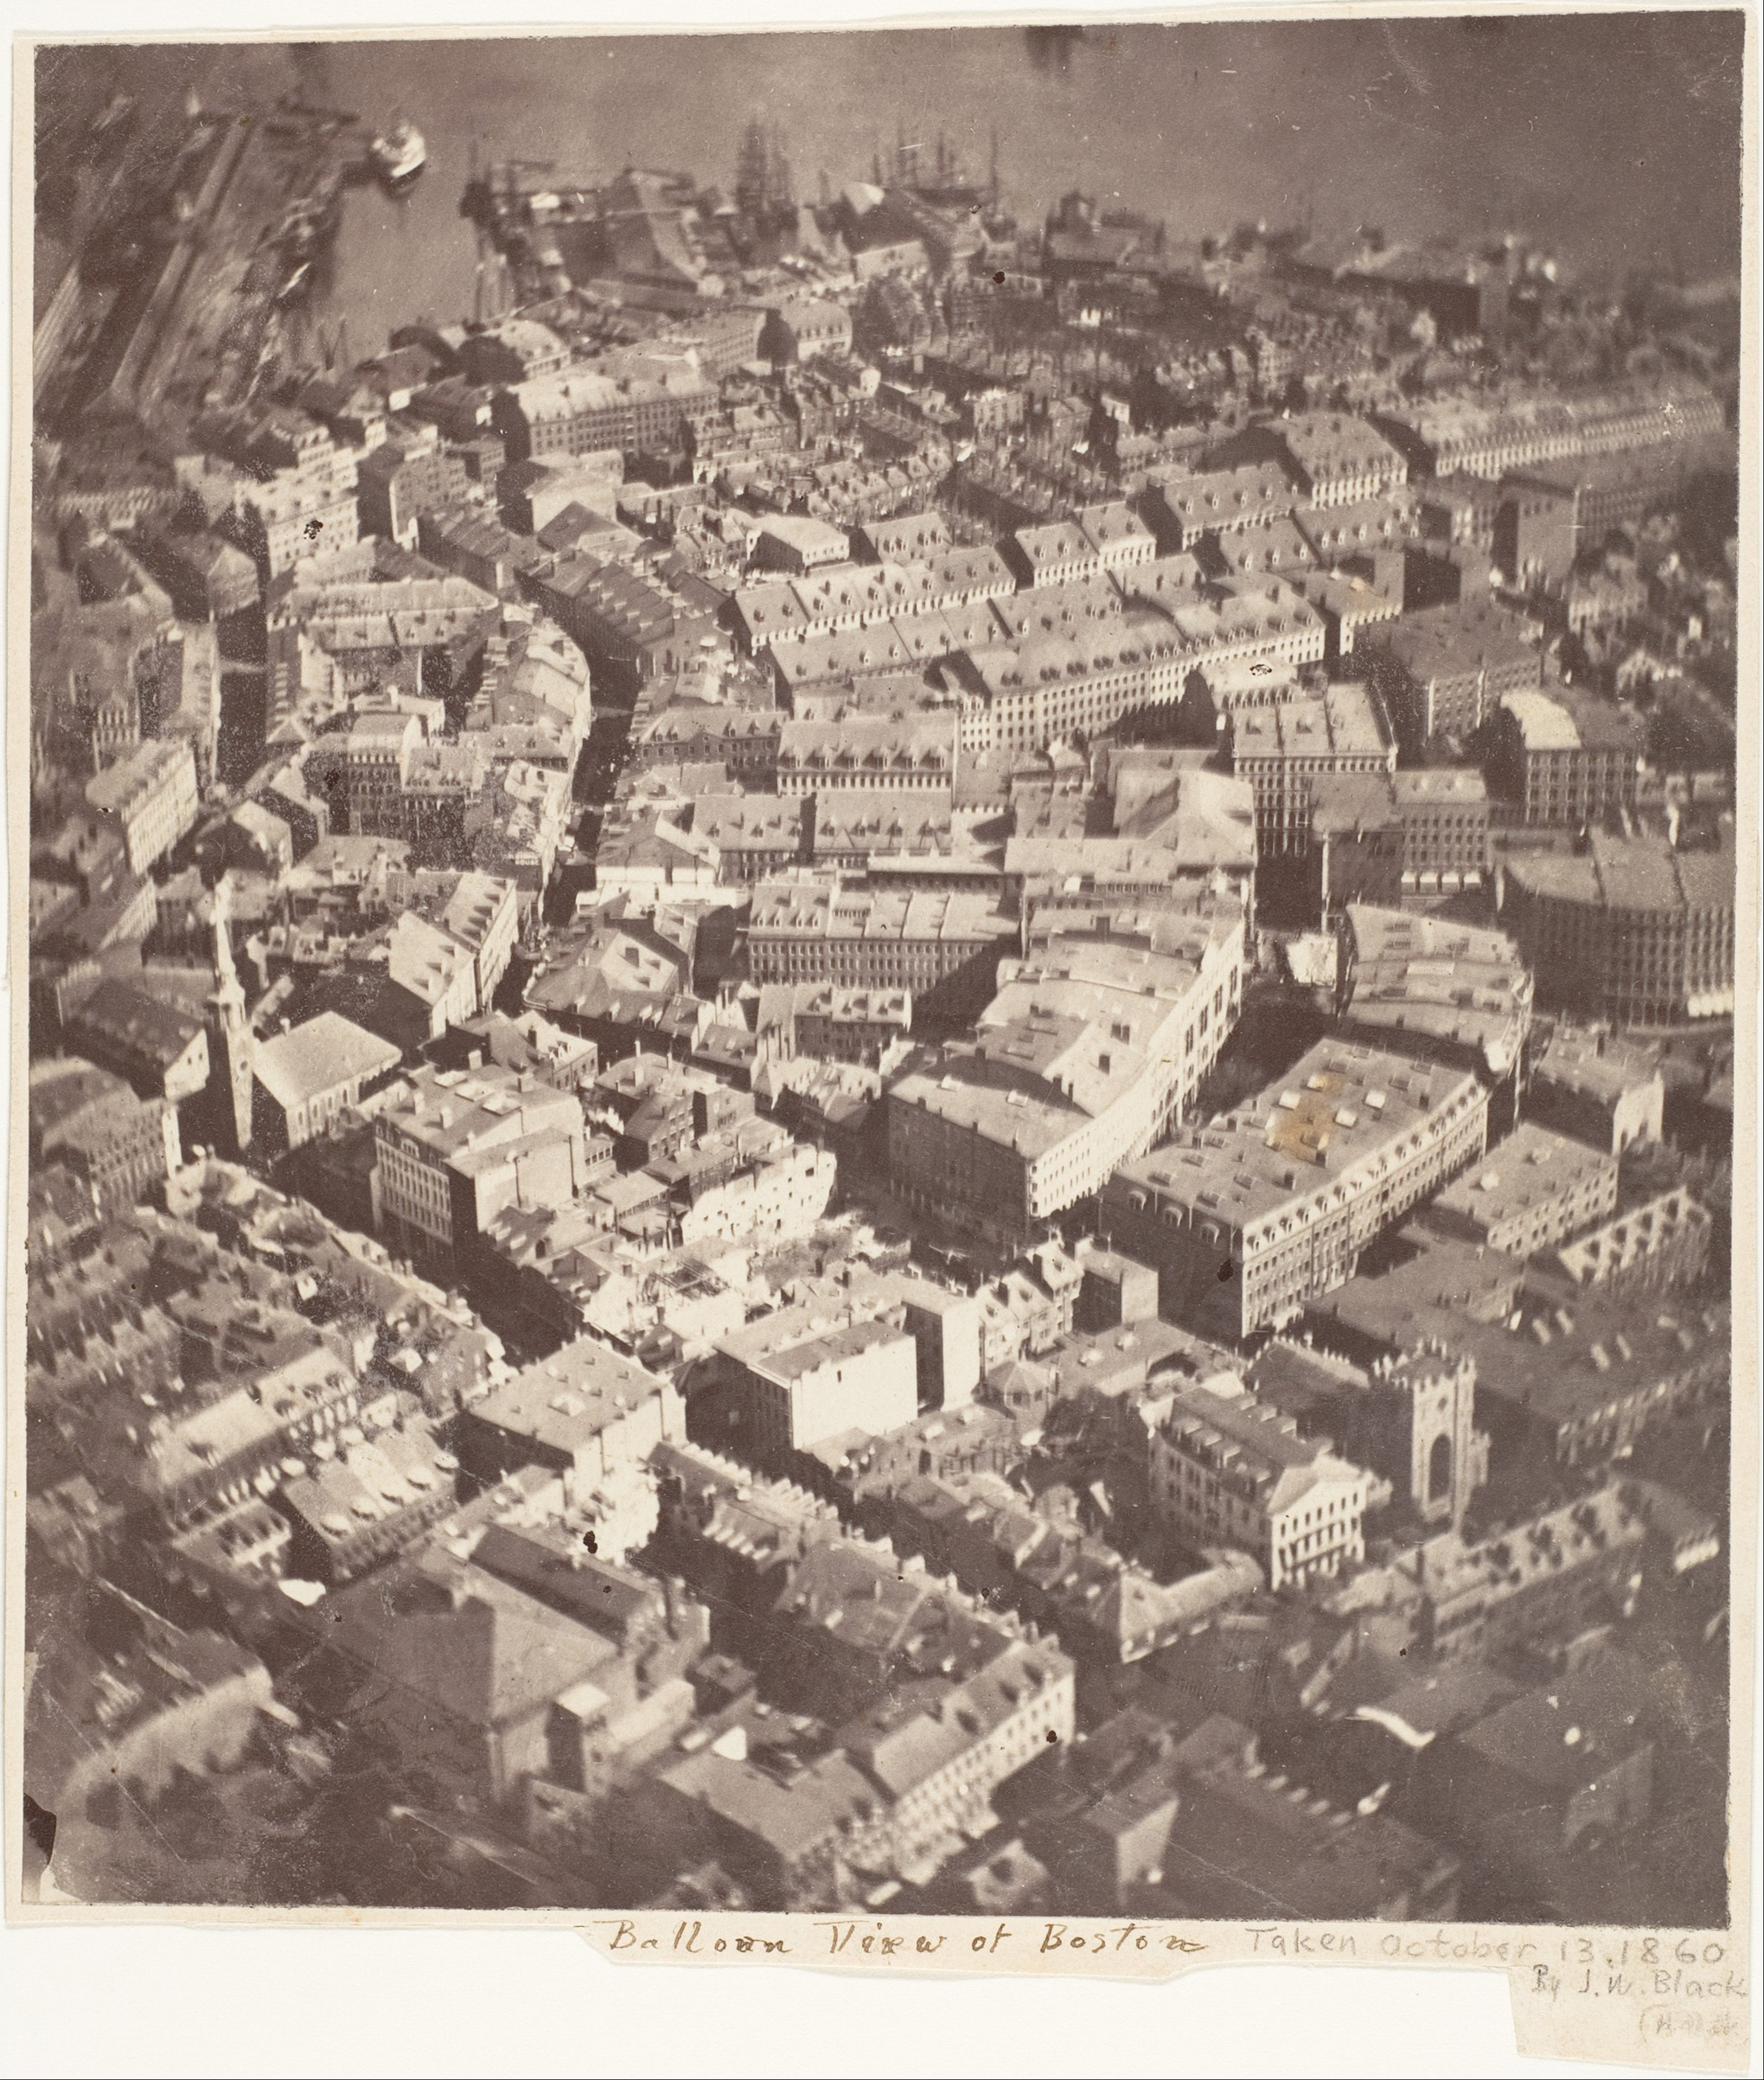 James Wallace Black's aerial photograph taken from tethered hot air balloon Queen of the Air 2,000 feet above Boston on October 13, 1860. It is the oldest surviving aerial photograph and first made in America (James Wallace Black—Metropolitan Museum of Art)